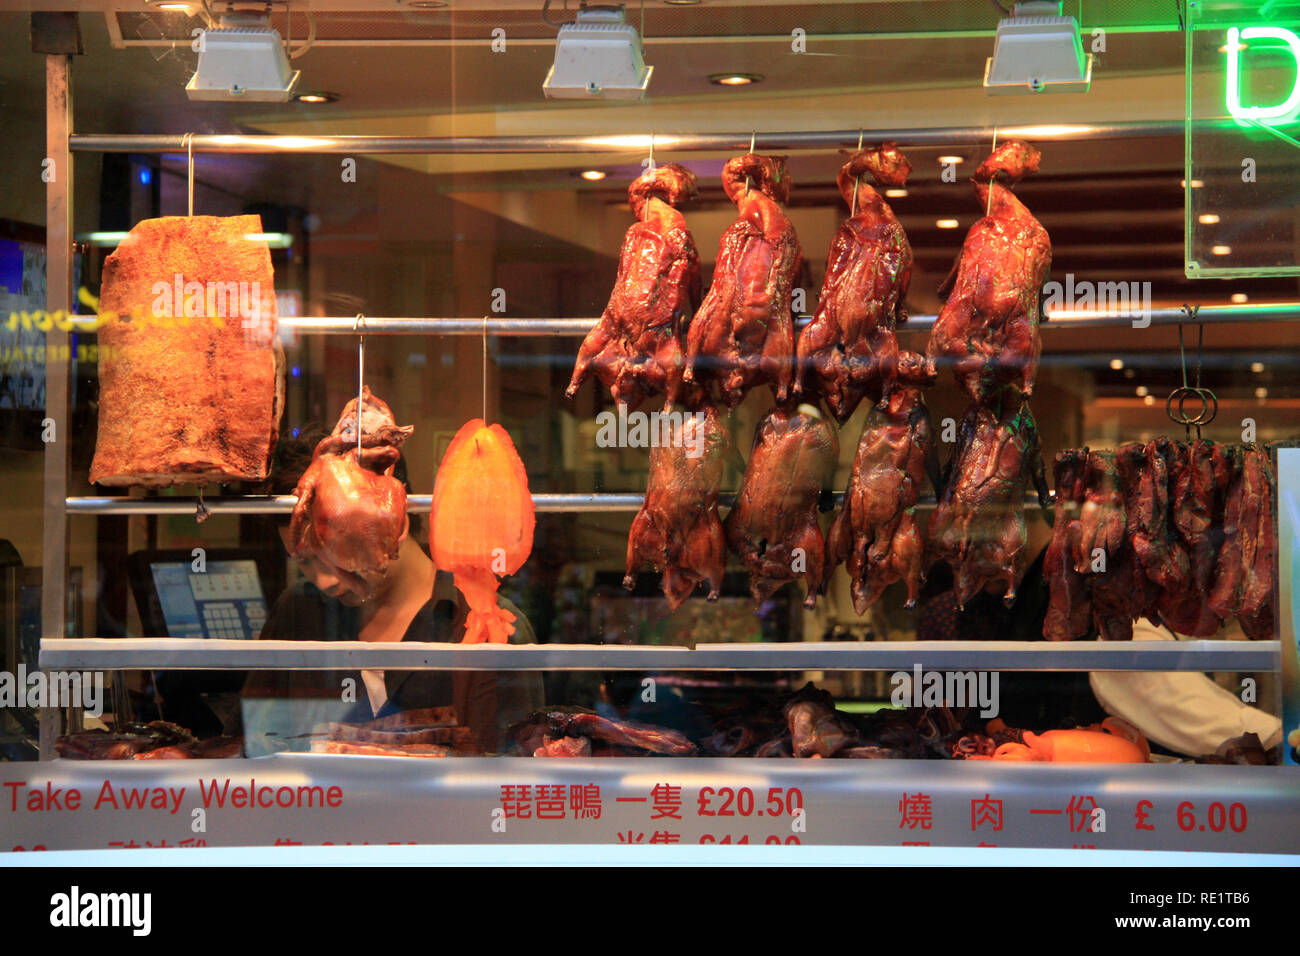 Roasted ducks, giant squid and other delicious Chinese food hanging in a store window in China Town in London, United Kingdom Stock Photo